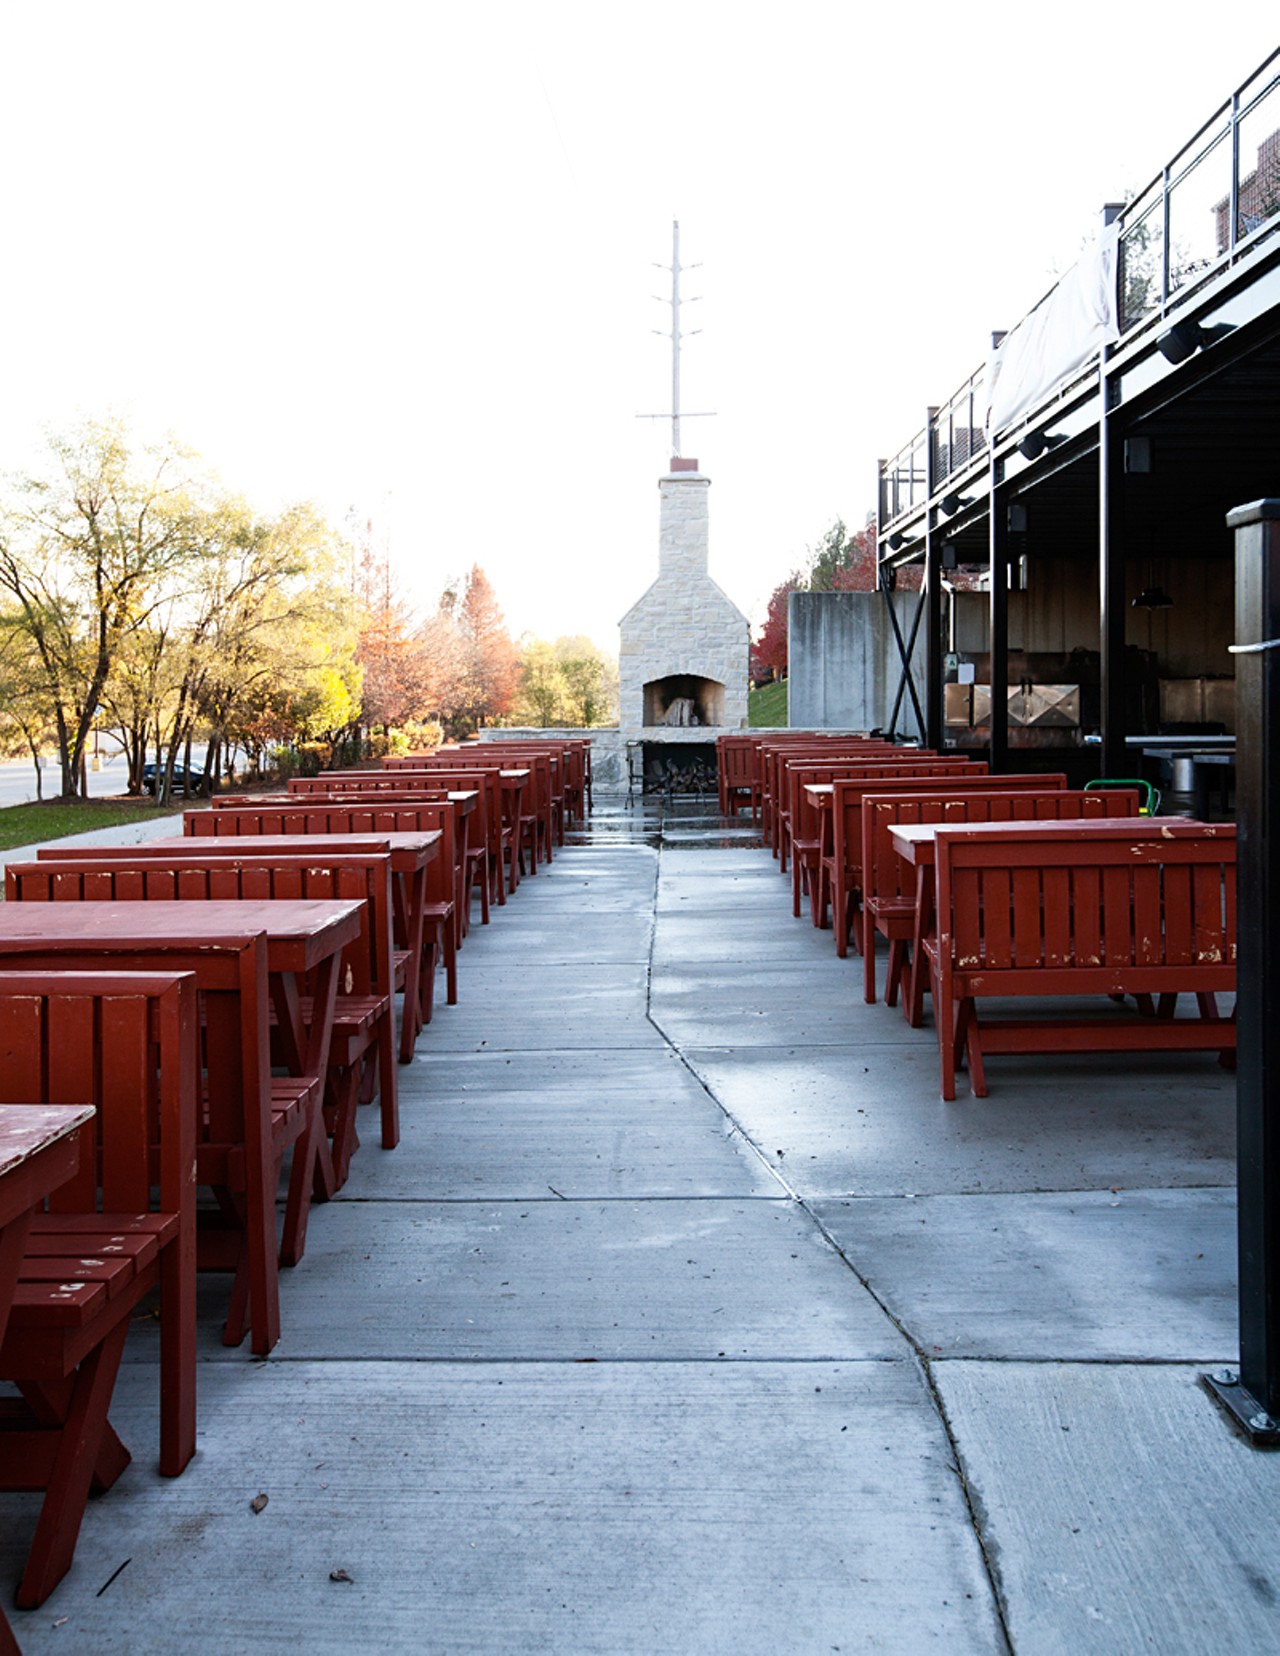 Part of the large outdoor-seating area at Hendricks BBQ.